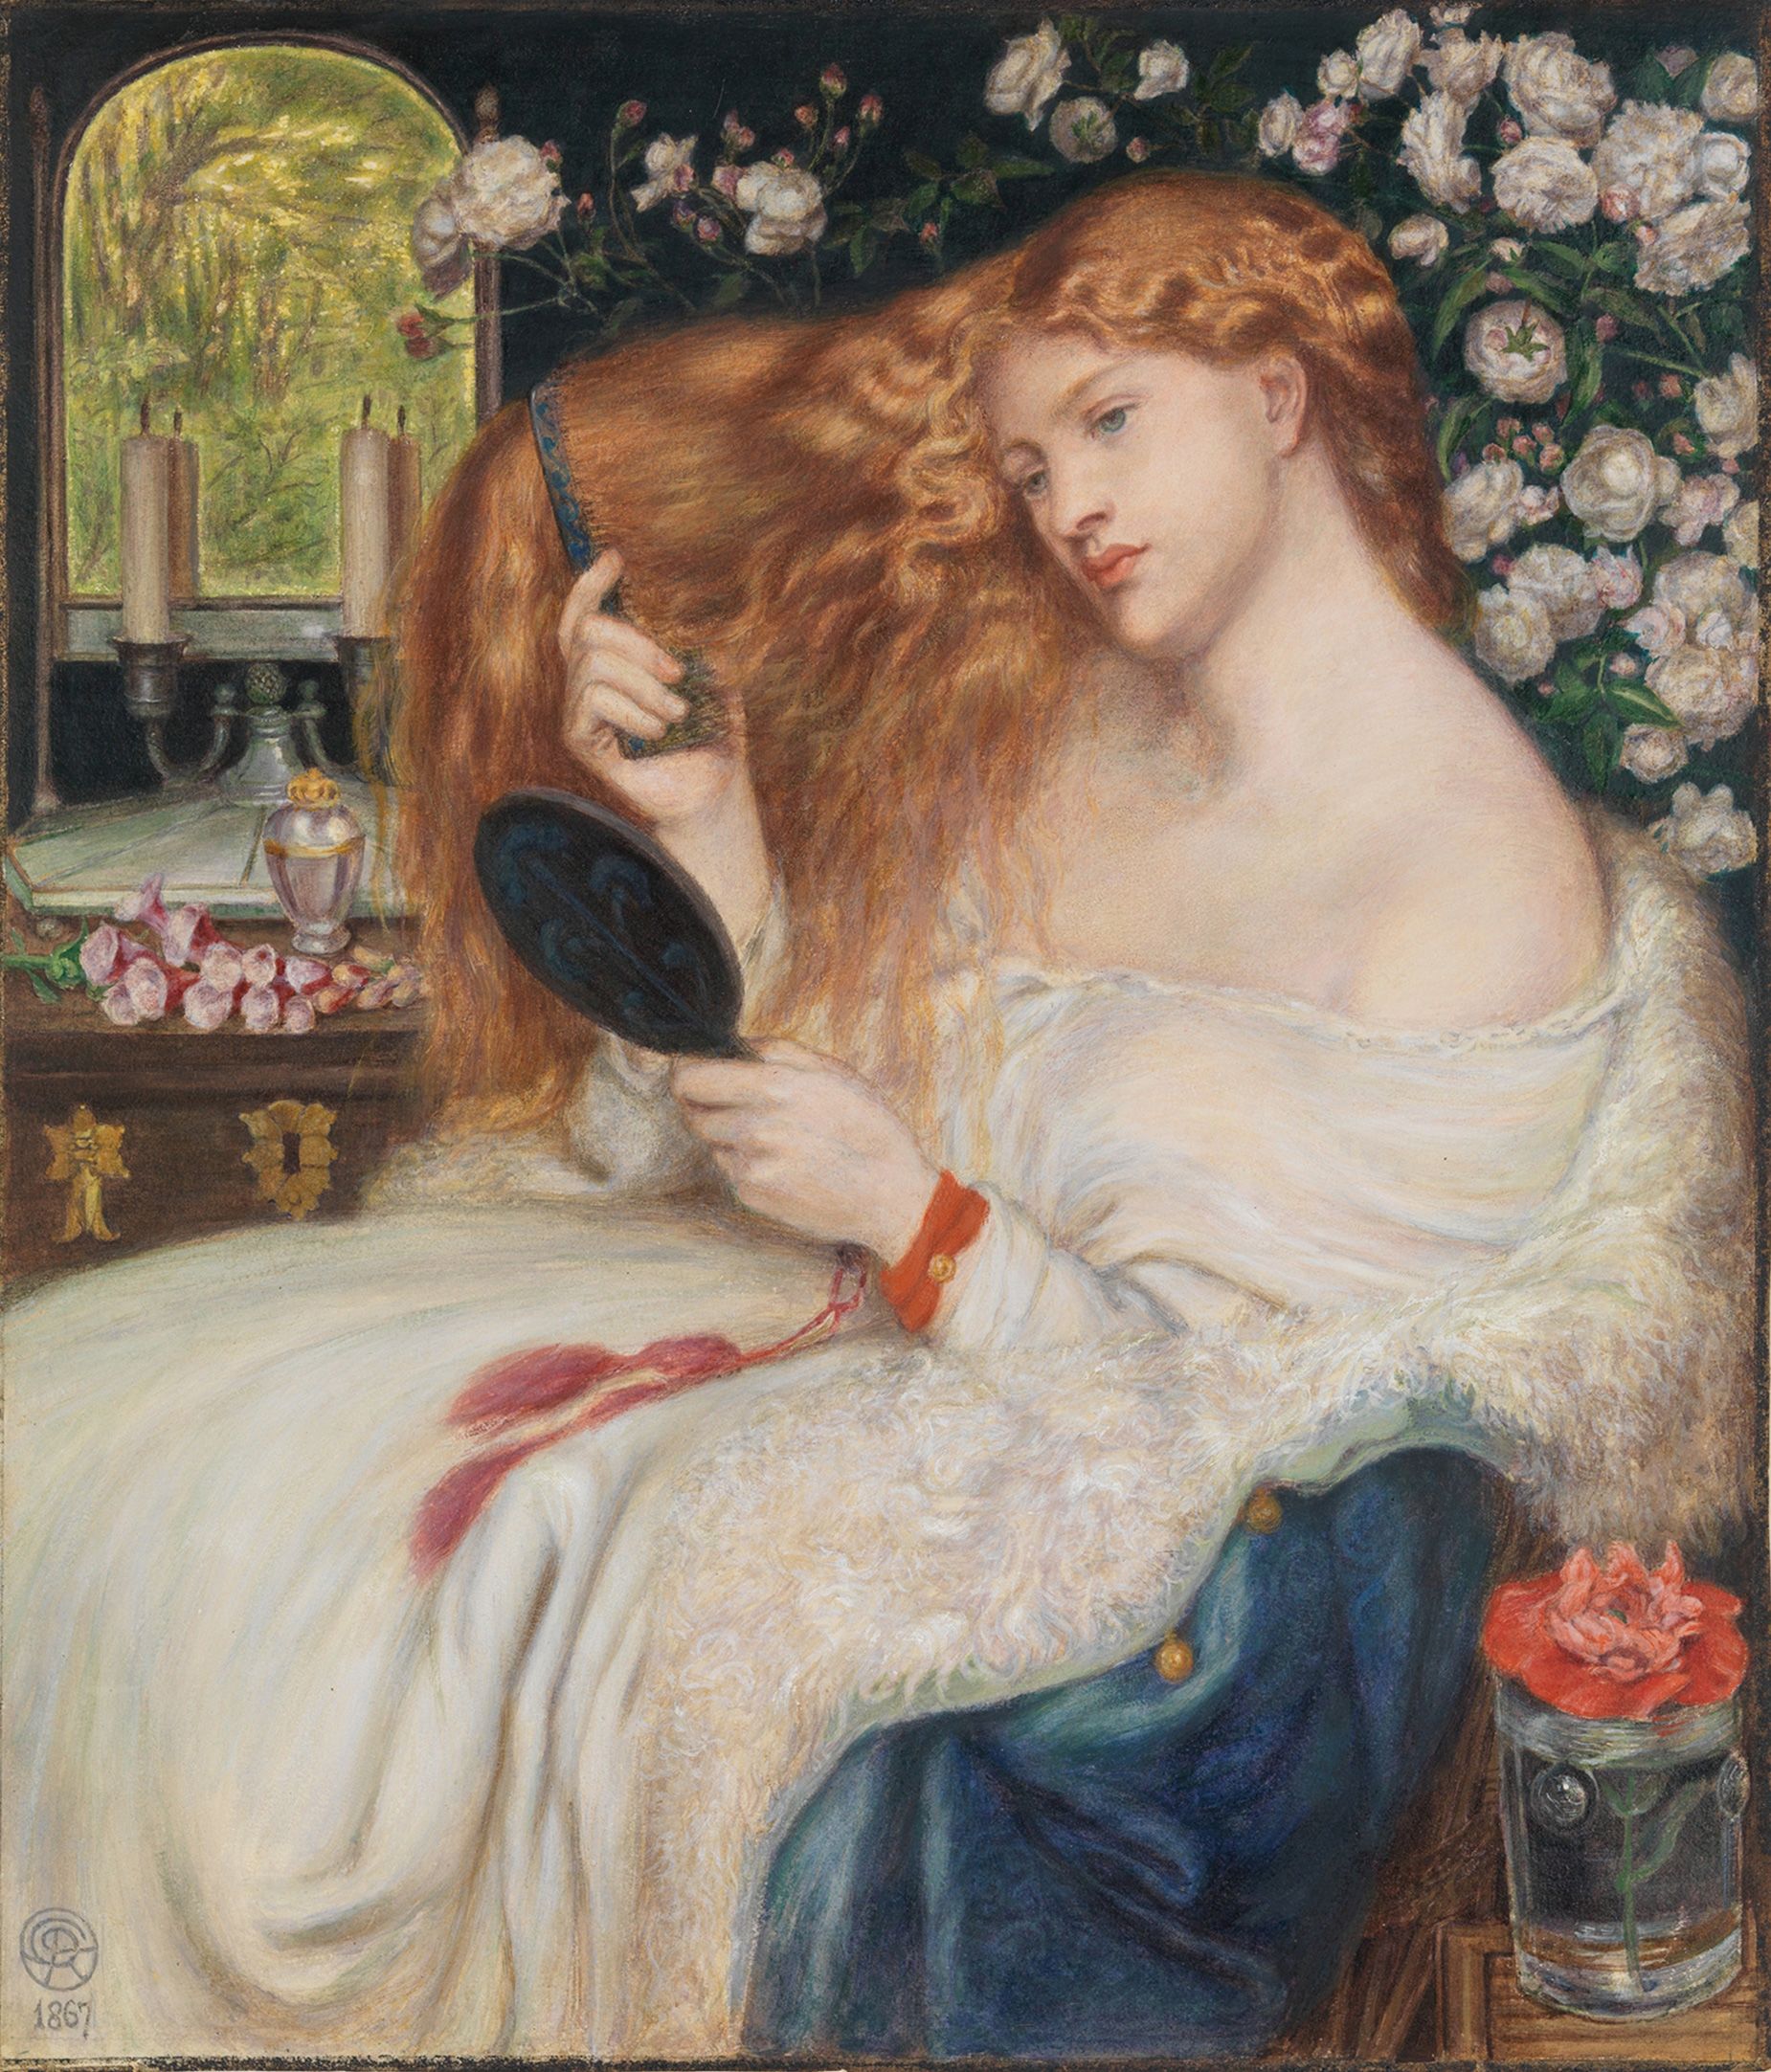 Gabriel Rossetti regularly painted red-haired women, as shown here with his imagined femme fatale "Lady Lilith," (1867).